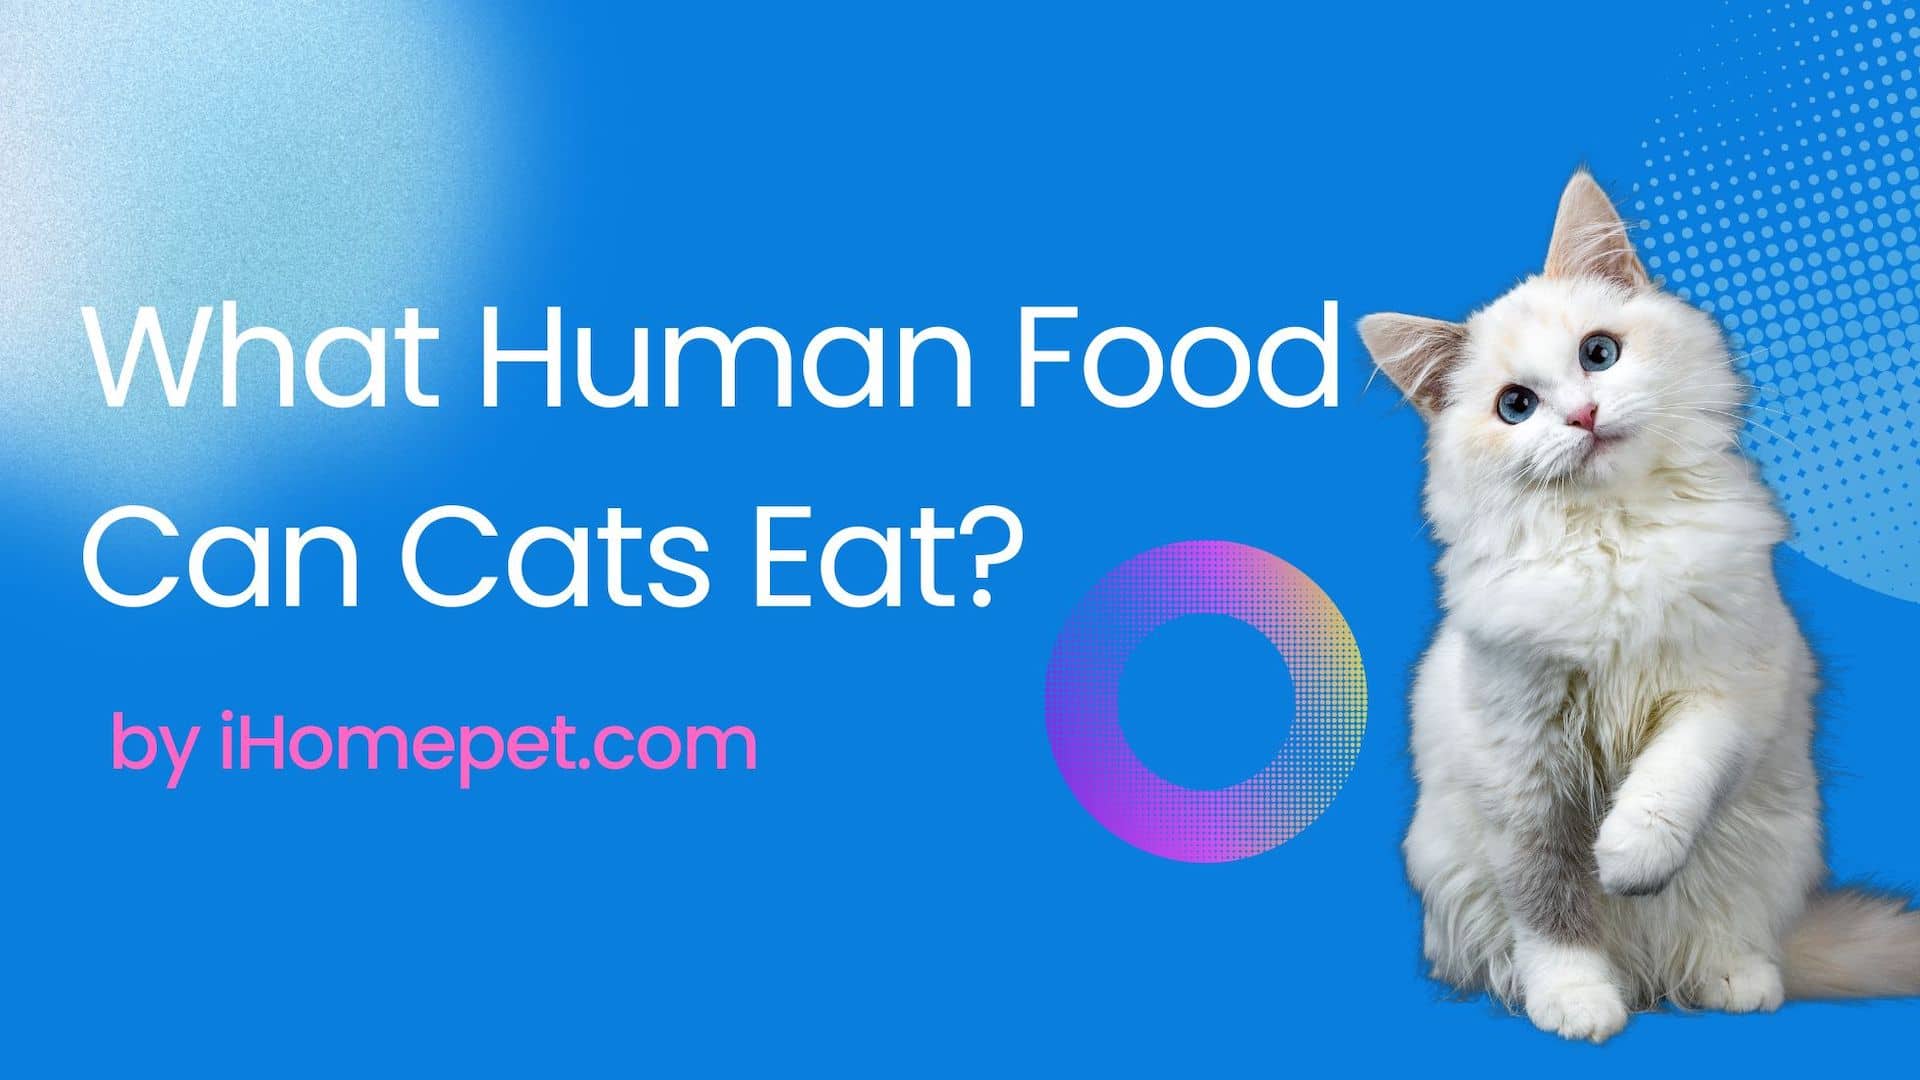 Human foods that are good for your feline's diet and digestive system